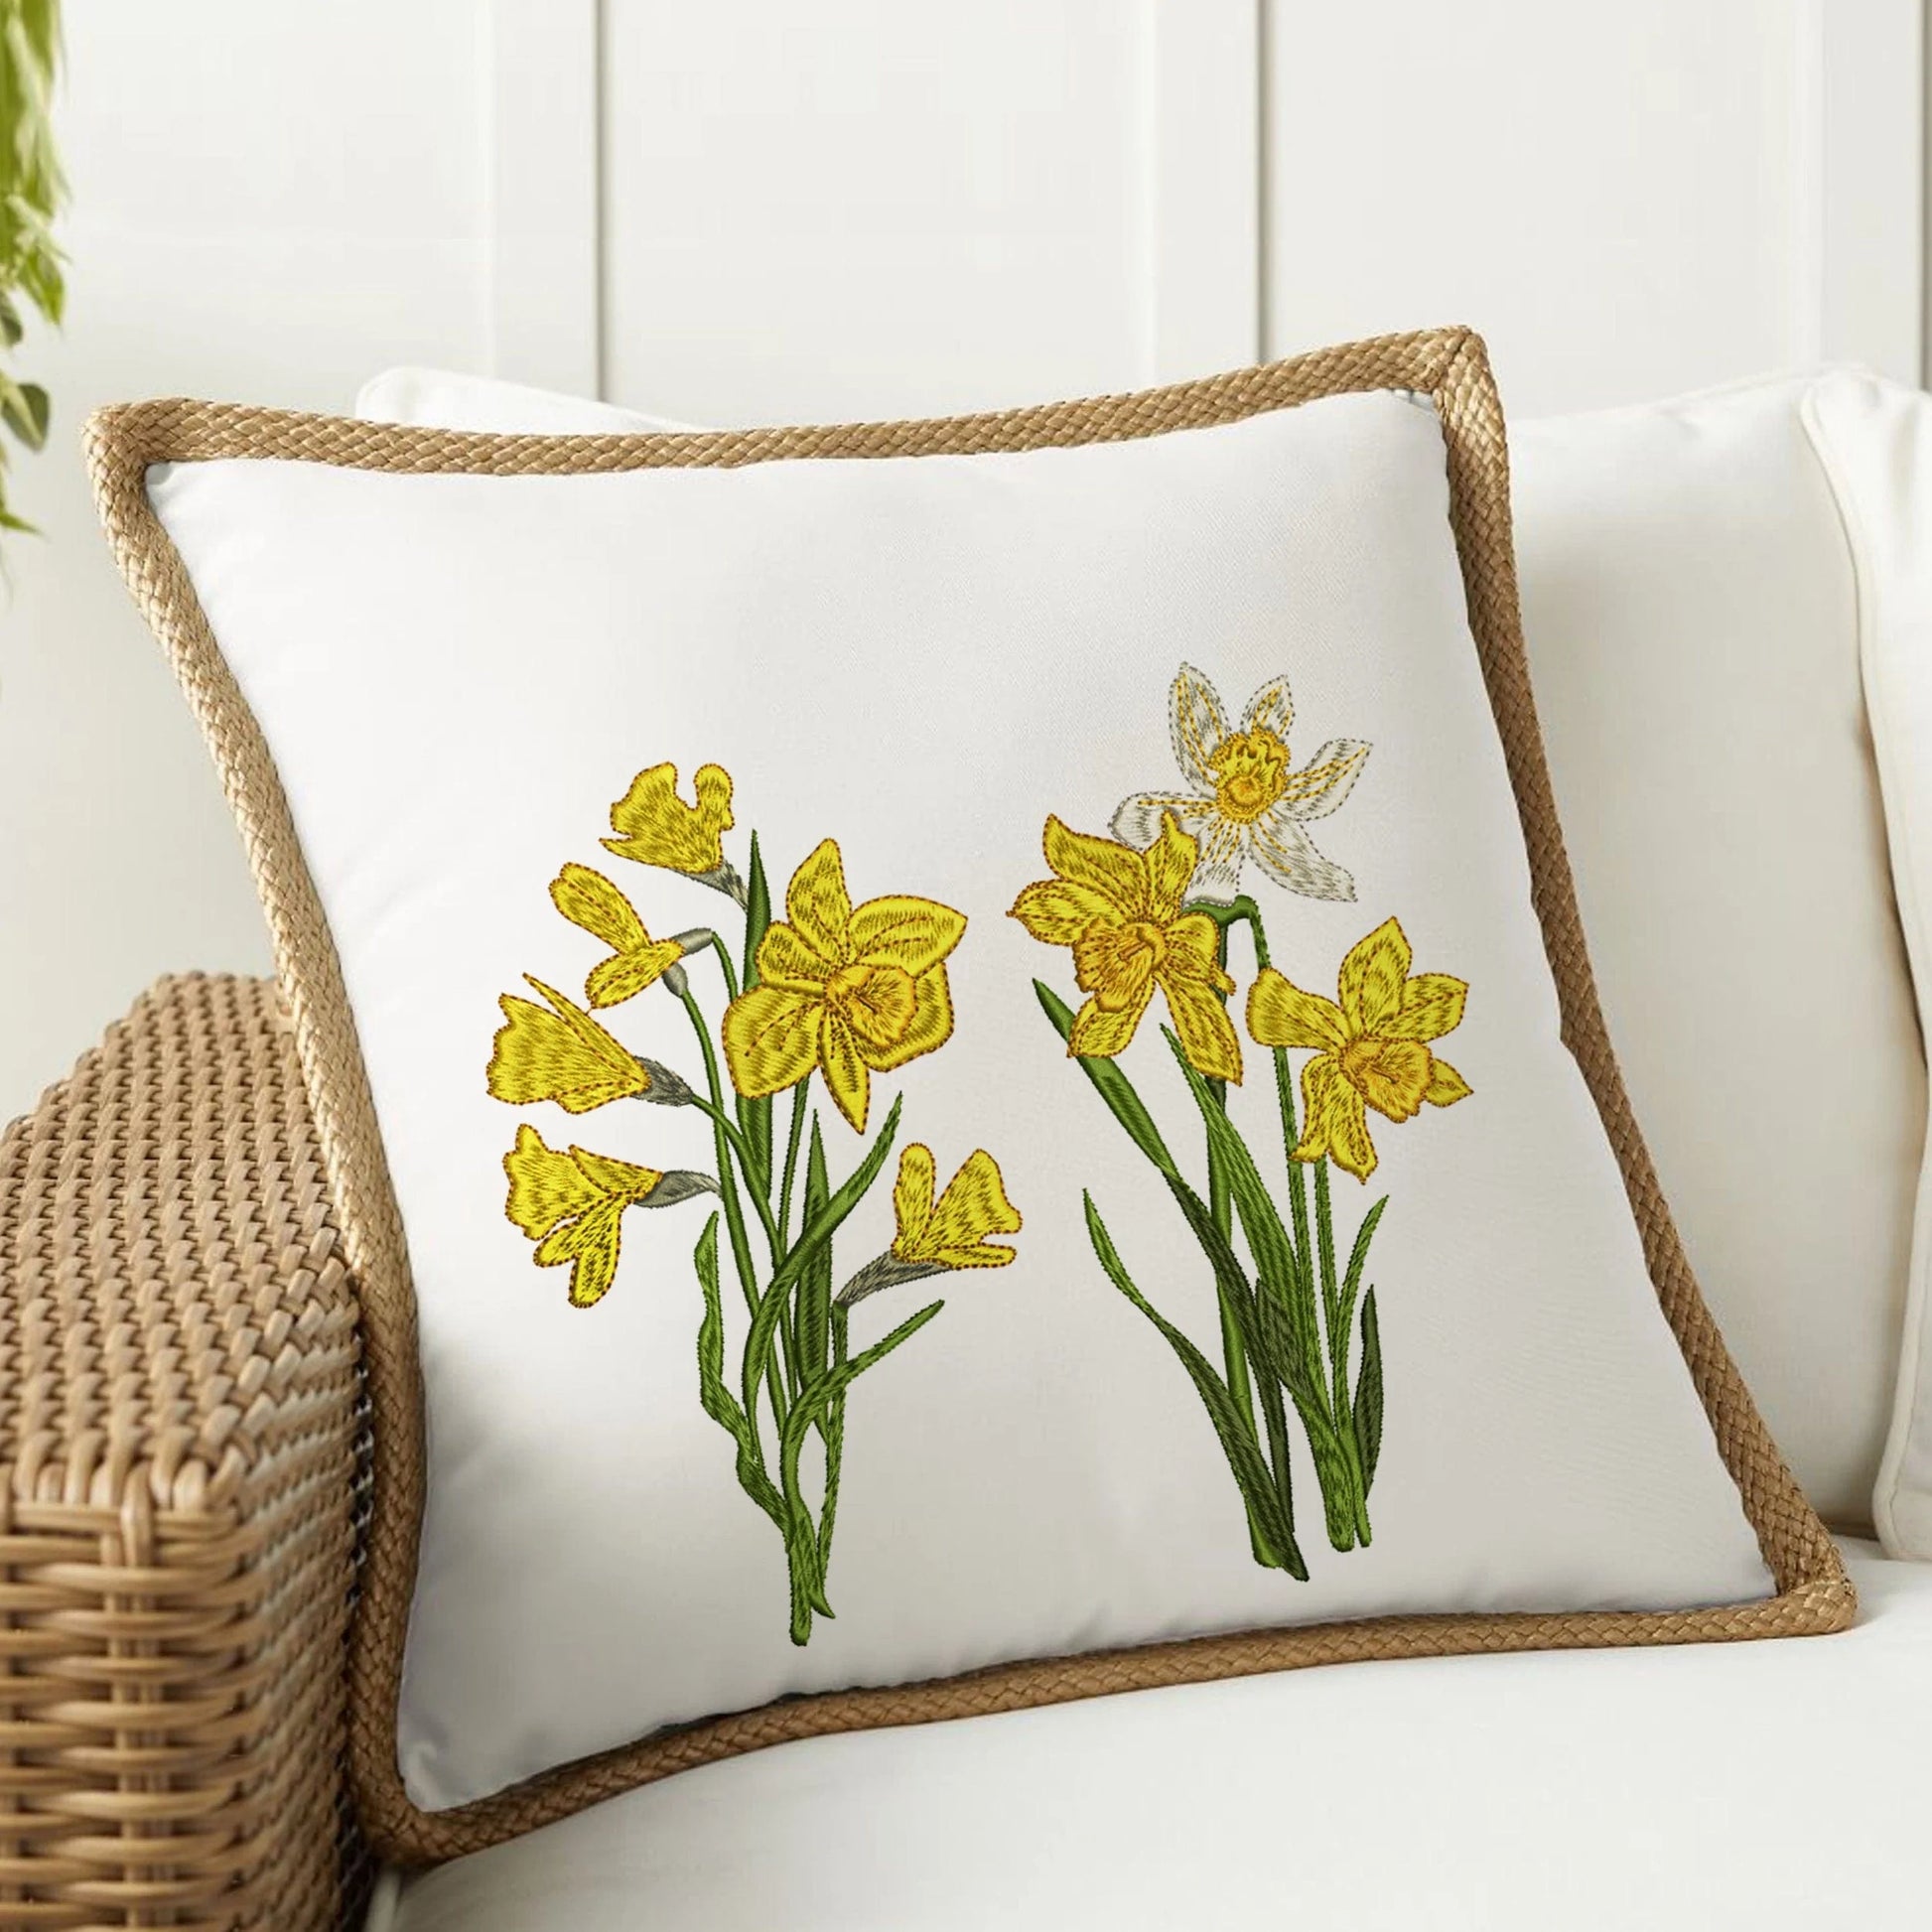 Daffodil Spring Narcissus Flowers machine embroidery design on pillow